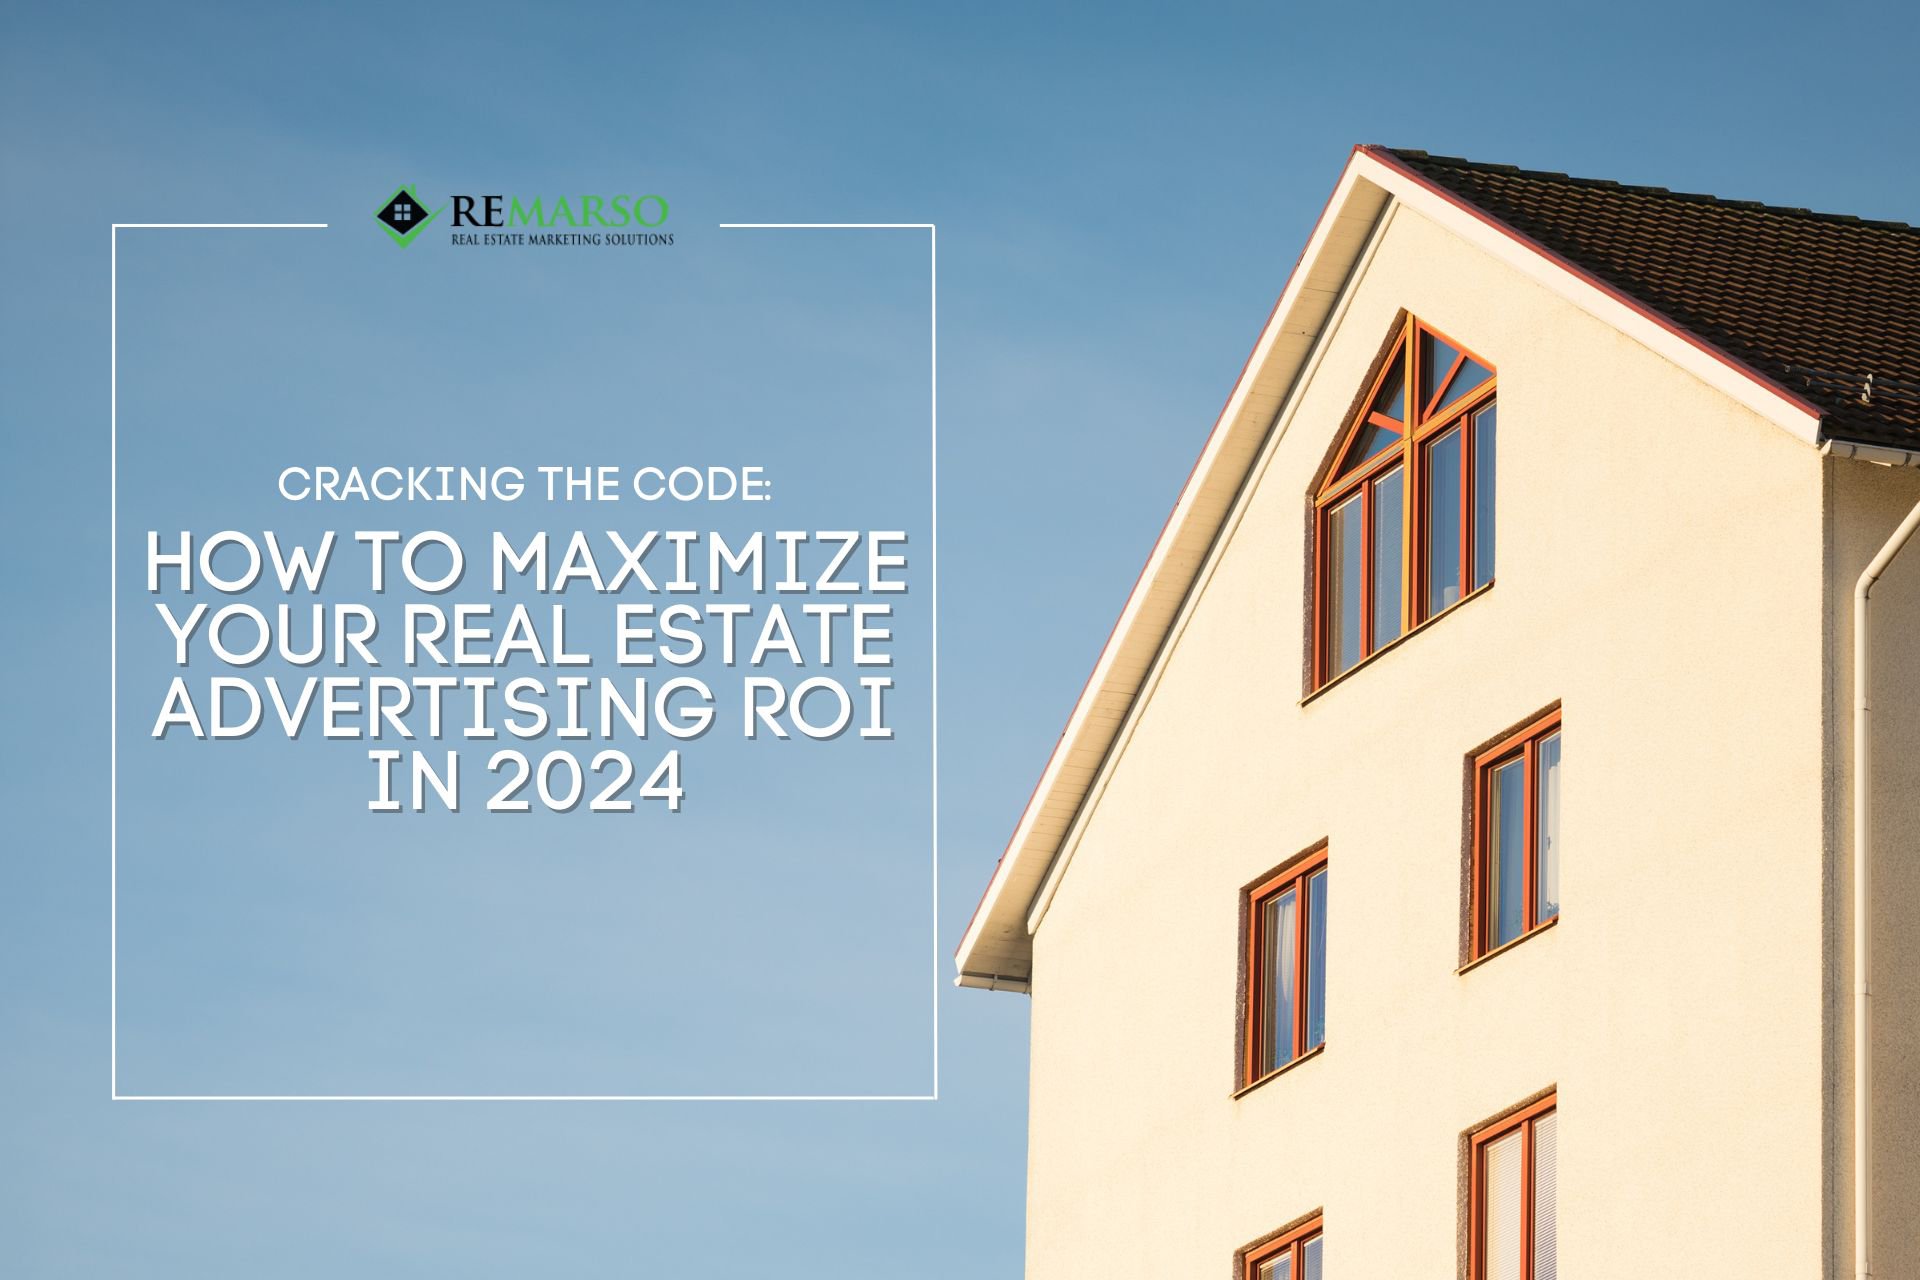 How to Maximize Your Real Estate Advertising ROI in 2024 cover